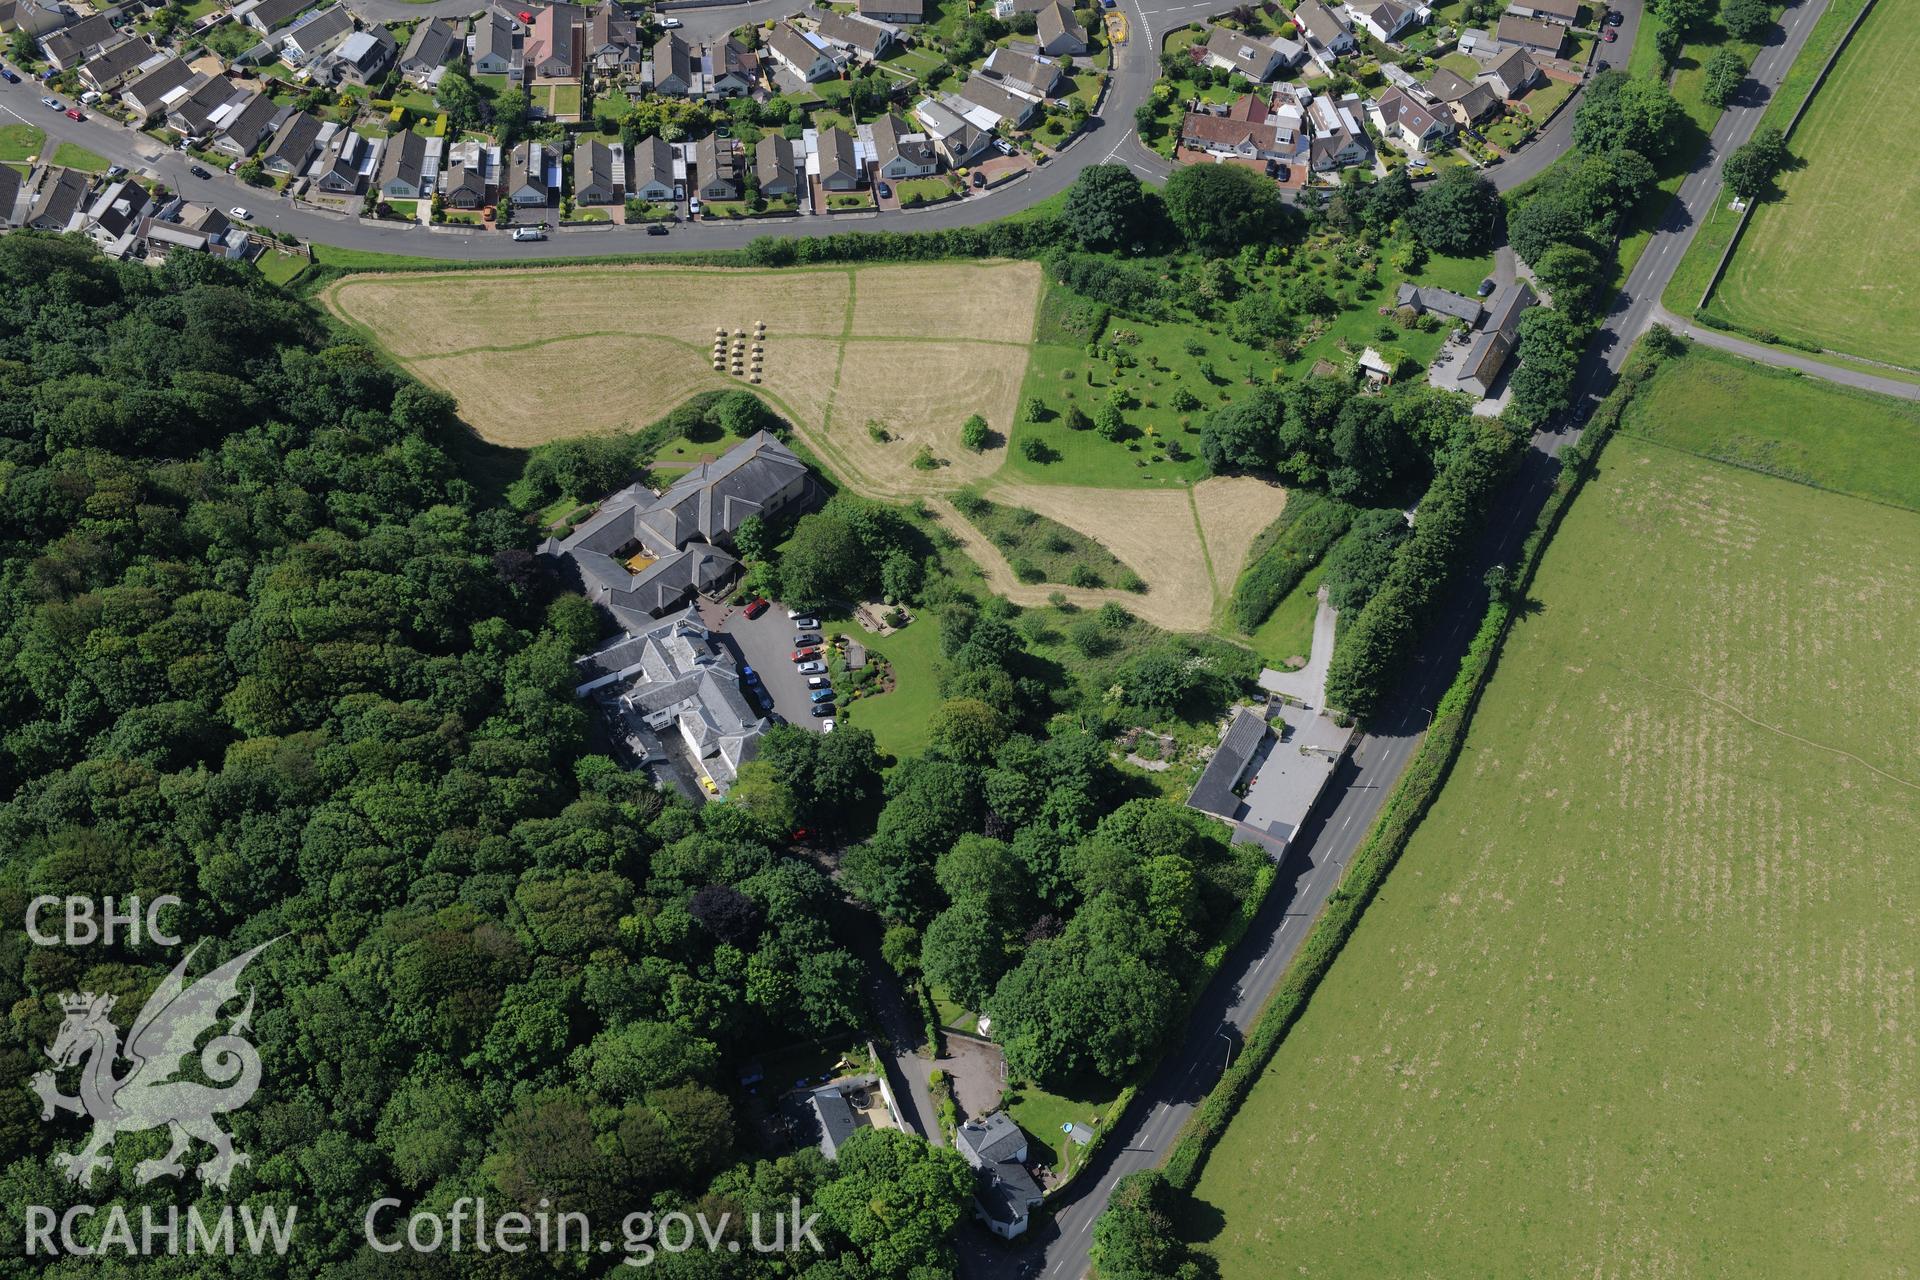 Dan-y-Graig house and garden, and Dan-y-Graig Roman Villa. Oblique aerial photograph taken during the Royal Commission's programme of archaeological aerial reconnaissance by Toby Driver on 19th June 2015.